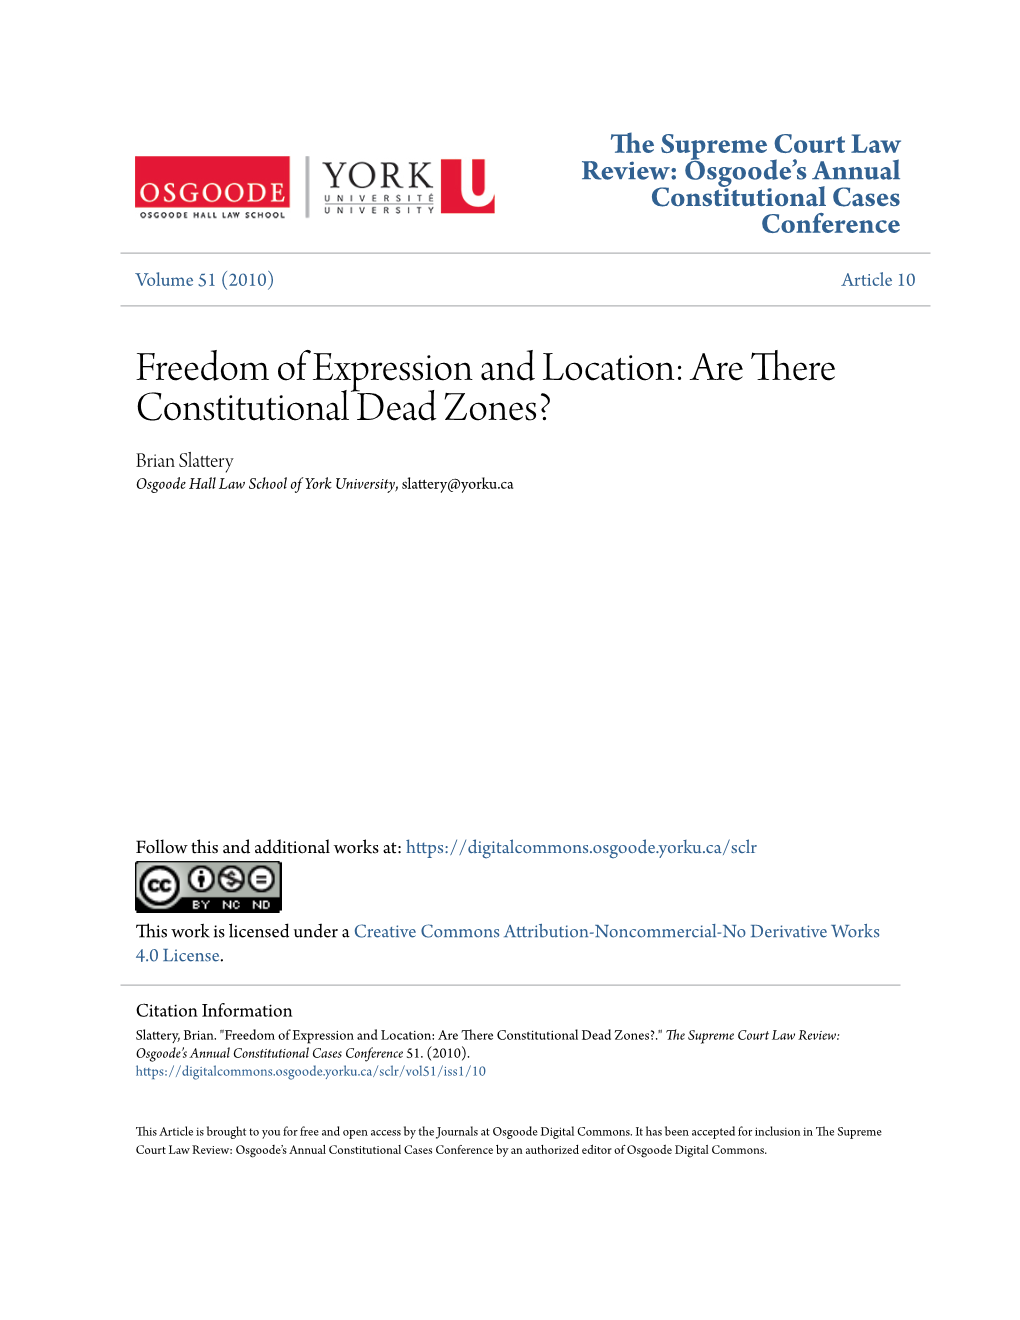 Are There Constitutional Dead Zones? Brian Slattery Osgoode Hall Law School of York University, Slattery@Yorku.Ca